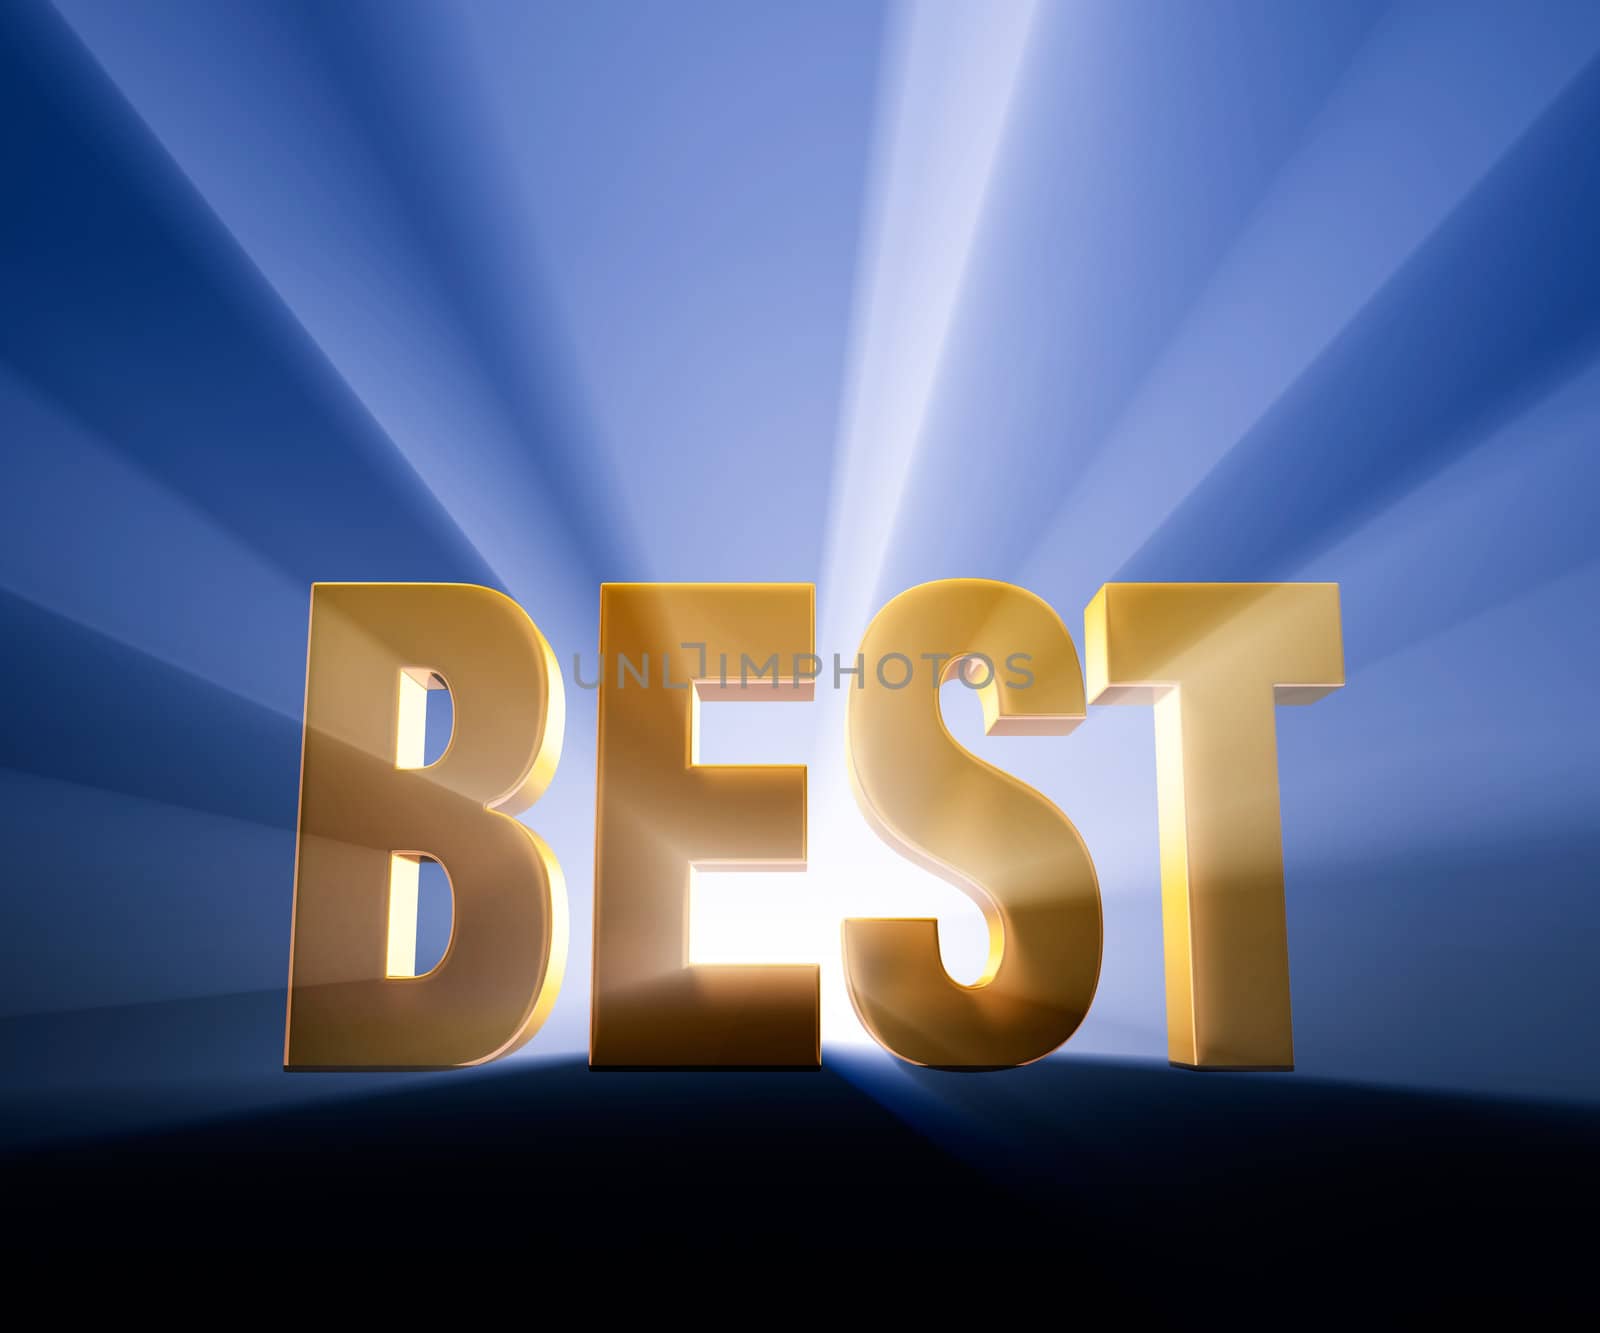 Dramatic, gold "BEST" on dark blue background and brilliantly backlight with light rays shining through.